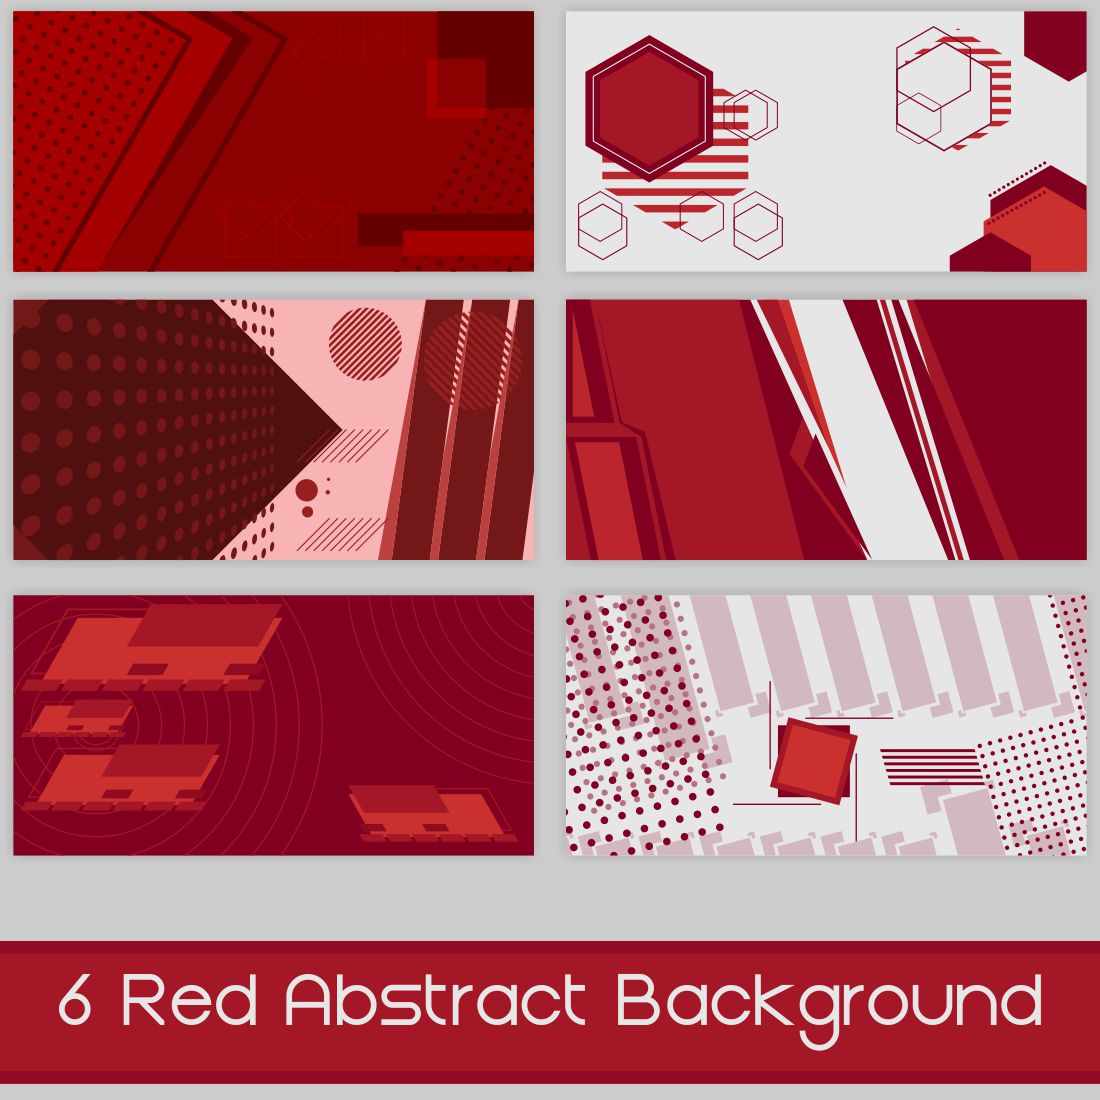 Abstract Red Background Flat Design cover image.